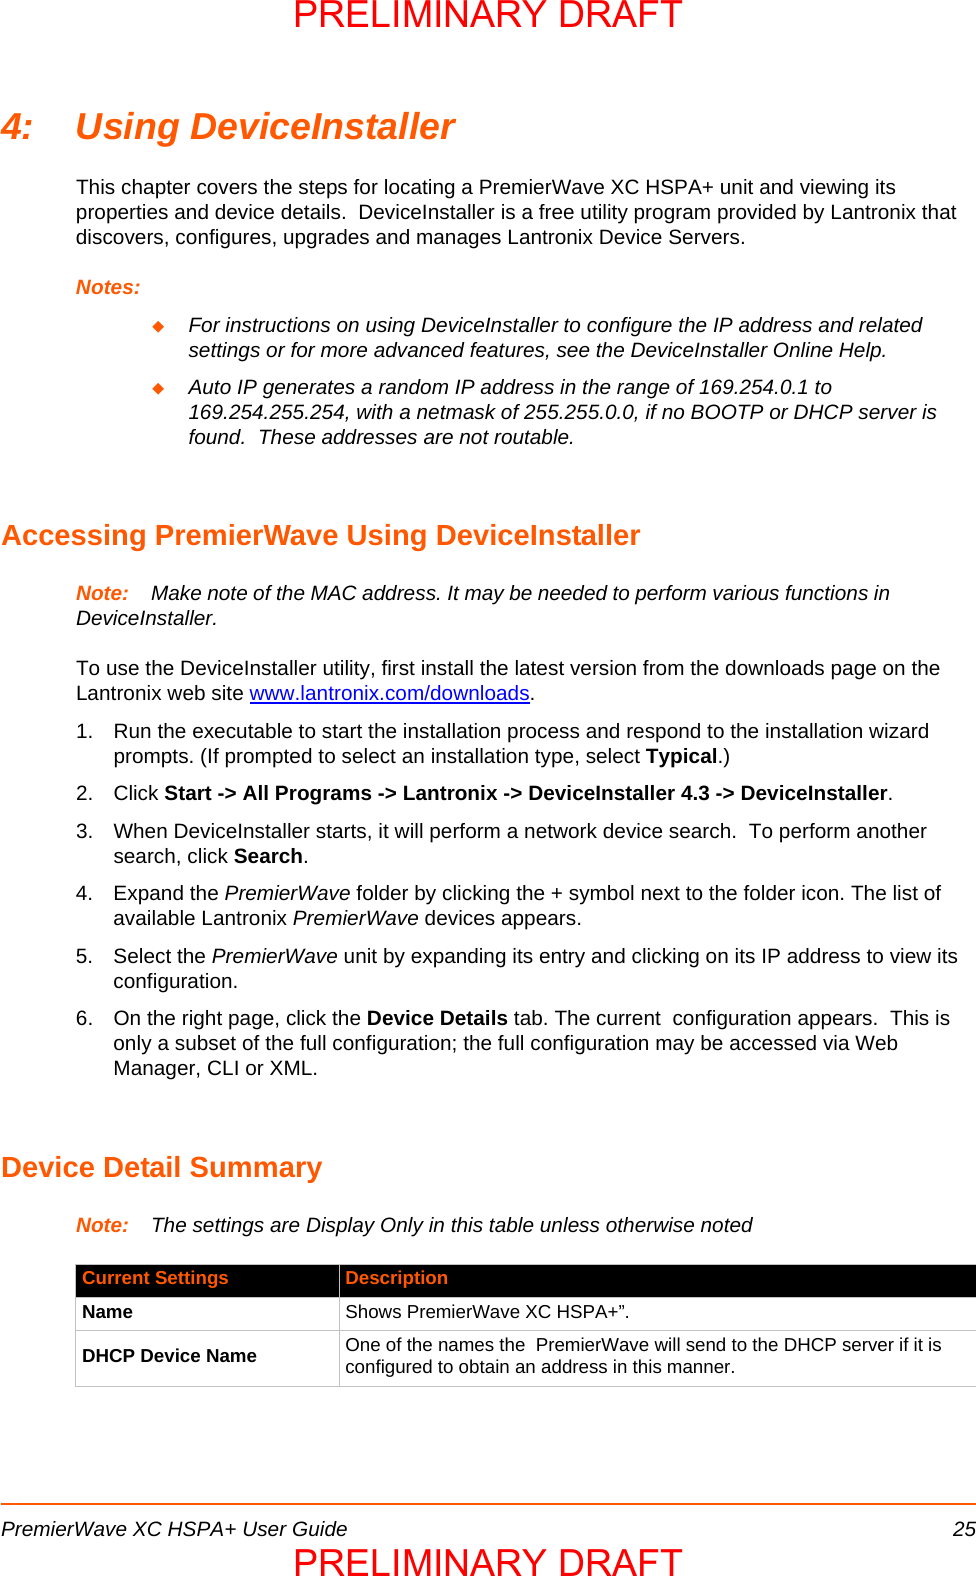 PremierWave XC HSPA+ User Guide 254: Using DeviceInstallerThis chapter covers the steps for locating a PremierWave XC HSPA+ unit and viewing its properties and device details.  DeviceInstaller is a free utility program provided by Lantronix that discovers, configures, upgrades and manages Lantronix Device Servers.Notes:For instructions on using DeviceInstaller to configure the IP address and related settings or for more advanced features, see the DeviceInstaller Online Help.Auto IP generates a random IP address in the range of 169.254.0.1 to 169.254.255.254, with a netmask of 255.255.0.0, if no BOOTP or DHCP server is found.  These addresses are not routable.Accessing PremierWave Using DeviceInstallerNote: Make note of the MAC address. It may be needed to perform various functions in  DeviceInstaller. To use the DeviceInstaller utility, first install the latest version from the downloads page on the Lantronix web site www.lantronix.com/downloads.1. Run the executable to start the installation process and respond to the installation wizard prompts. (If prompted to select an installation type, select Typical.)2. Click Start -&gt; All Programs -&gt; Lantronix -&gt; DeviceInstaller 4.3 -&gt; DeviceInstaller.3. When DeviceInstaller starts, it will perform a network device search.  To perform another search, click Search.4. Expand the PremierWave folder by clicking the + symbol next to the folder icon. The list of available Lantronix PremierWave devices appears.5. Select the PremierWave unit by expanding its entry and clicking on its IP address to view its configuration.6. On the right page, click the Device Details tab. The current  configuration appears.  This is only a subset of the full configuration; the full configuration may be accessed via Web Manager, CLI or XML.Device Detail SummaryNote: The settings are Display Only in this table unless otherwise notedCurrent Settings DescriptionName Shows PremierWave XC HSPA+”. DHCP Device Name One of the names the  PremierWave will send to the DHCP server if it is configured to obtain an address in this manner.PRELIMINARY DRAFTPRELIMINARY DRAFT